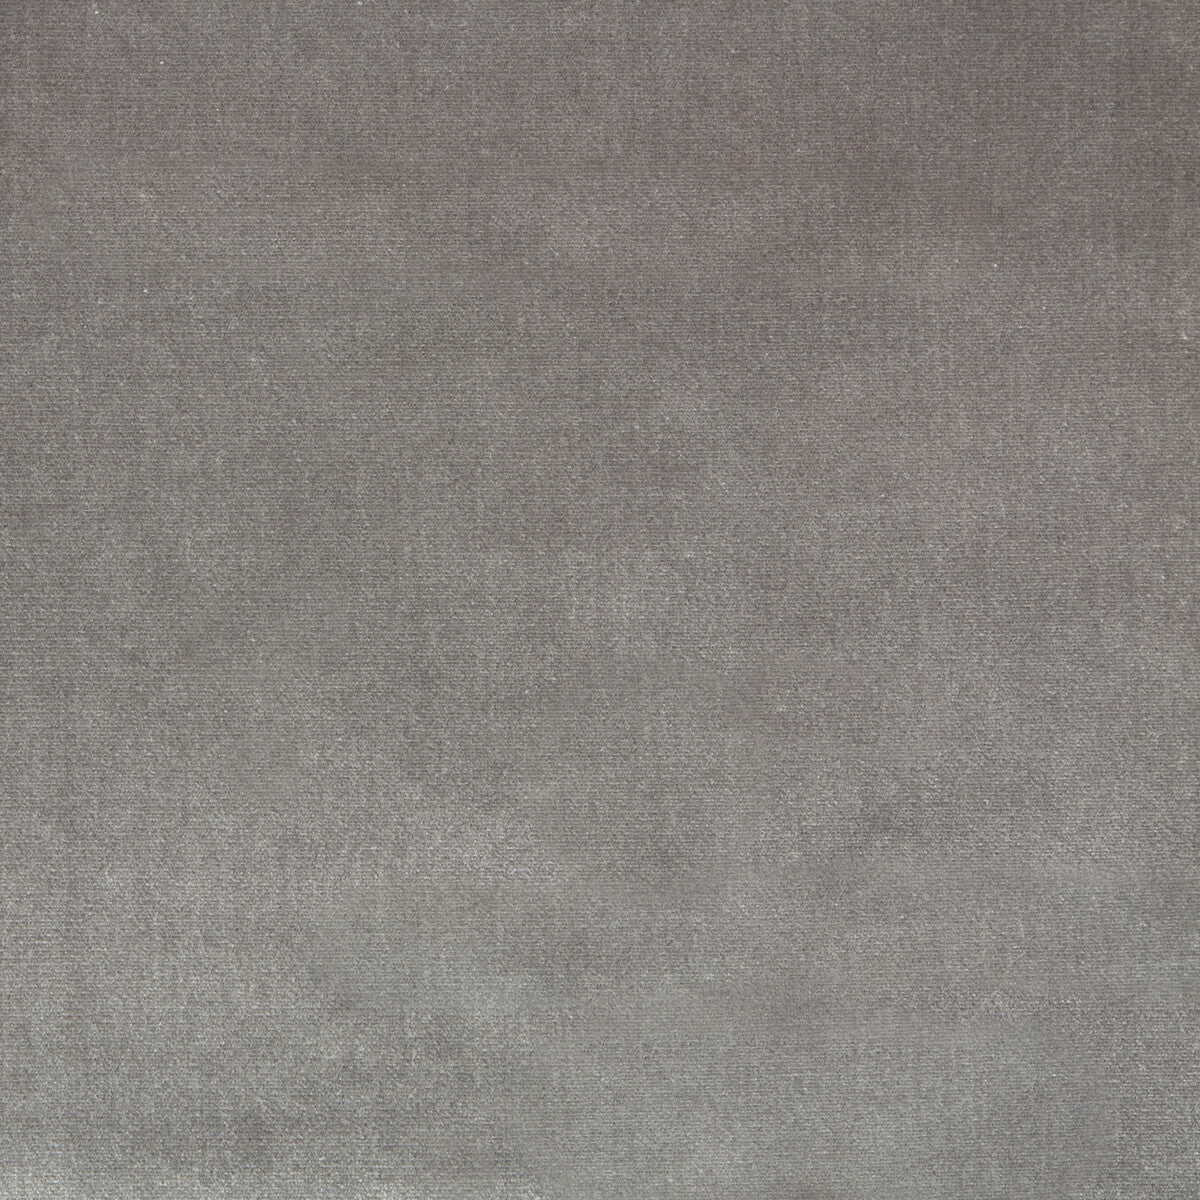 Duchess Velvet fabric in pewter color - pattern 34641.11.0 - by Kravet Couture